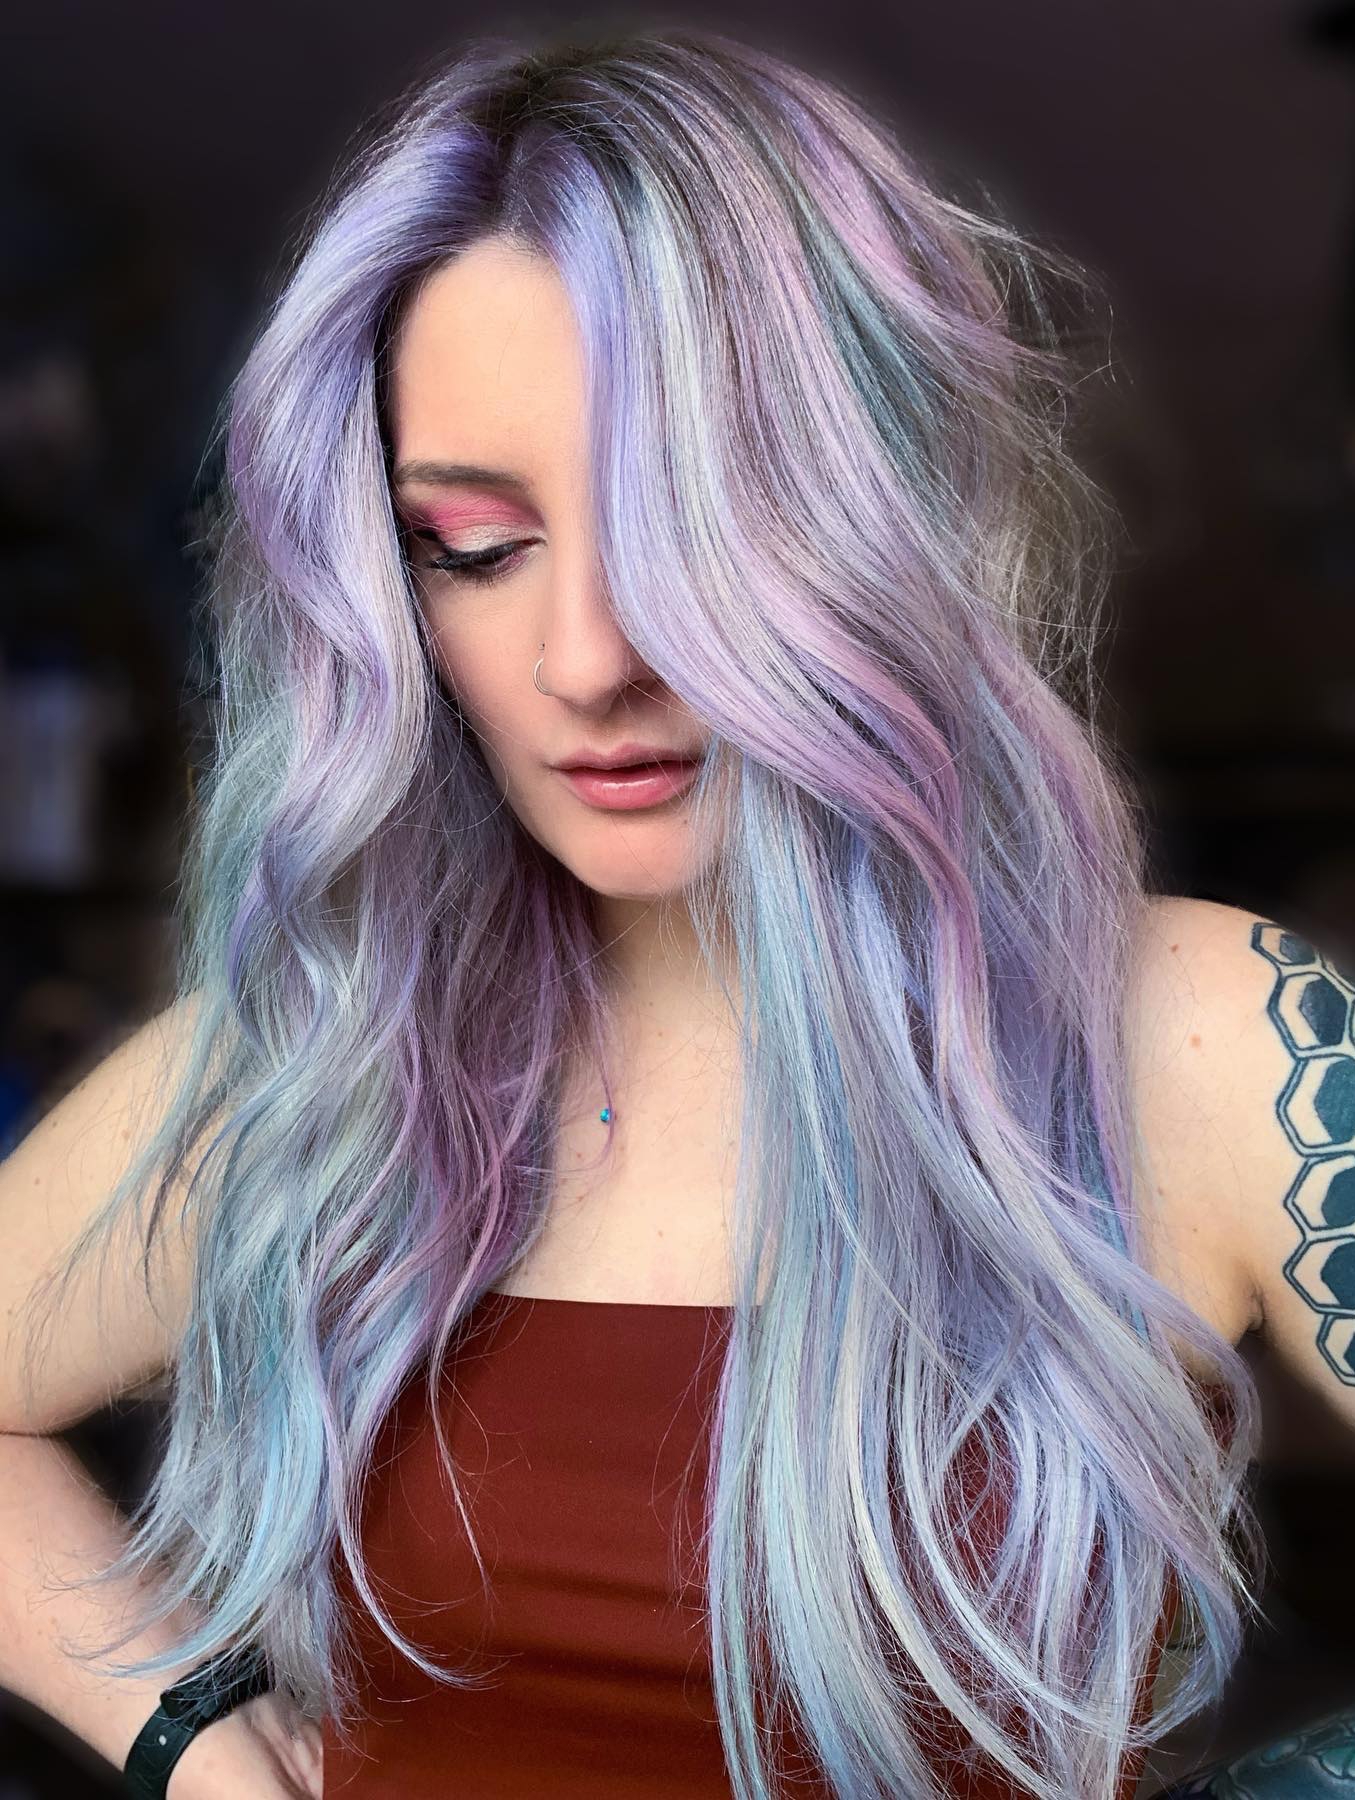 Long Lavender Hair with Blue Shades